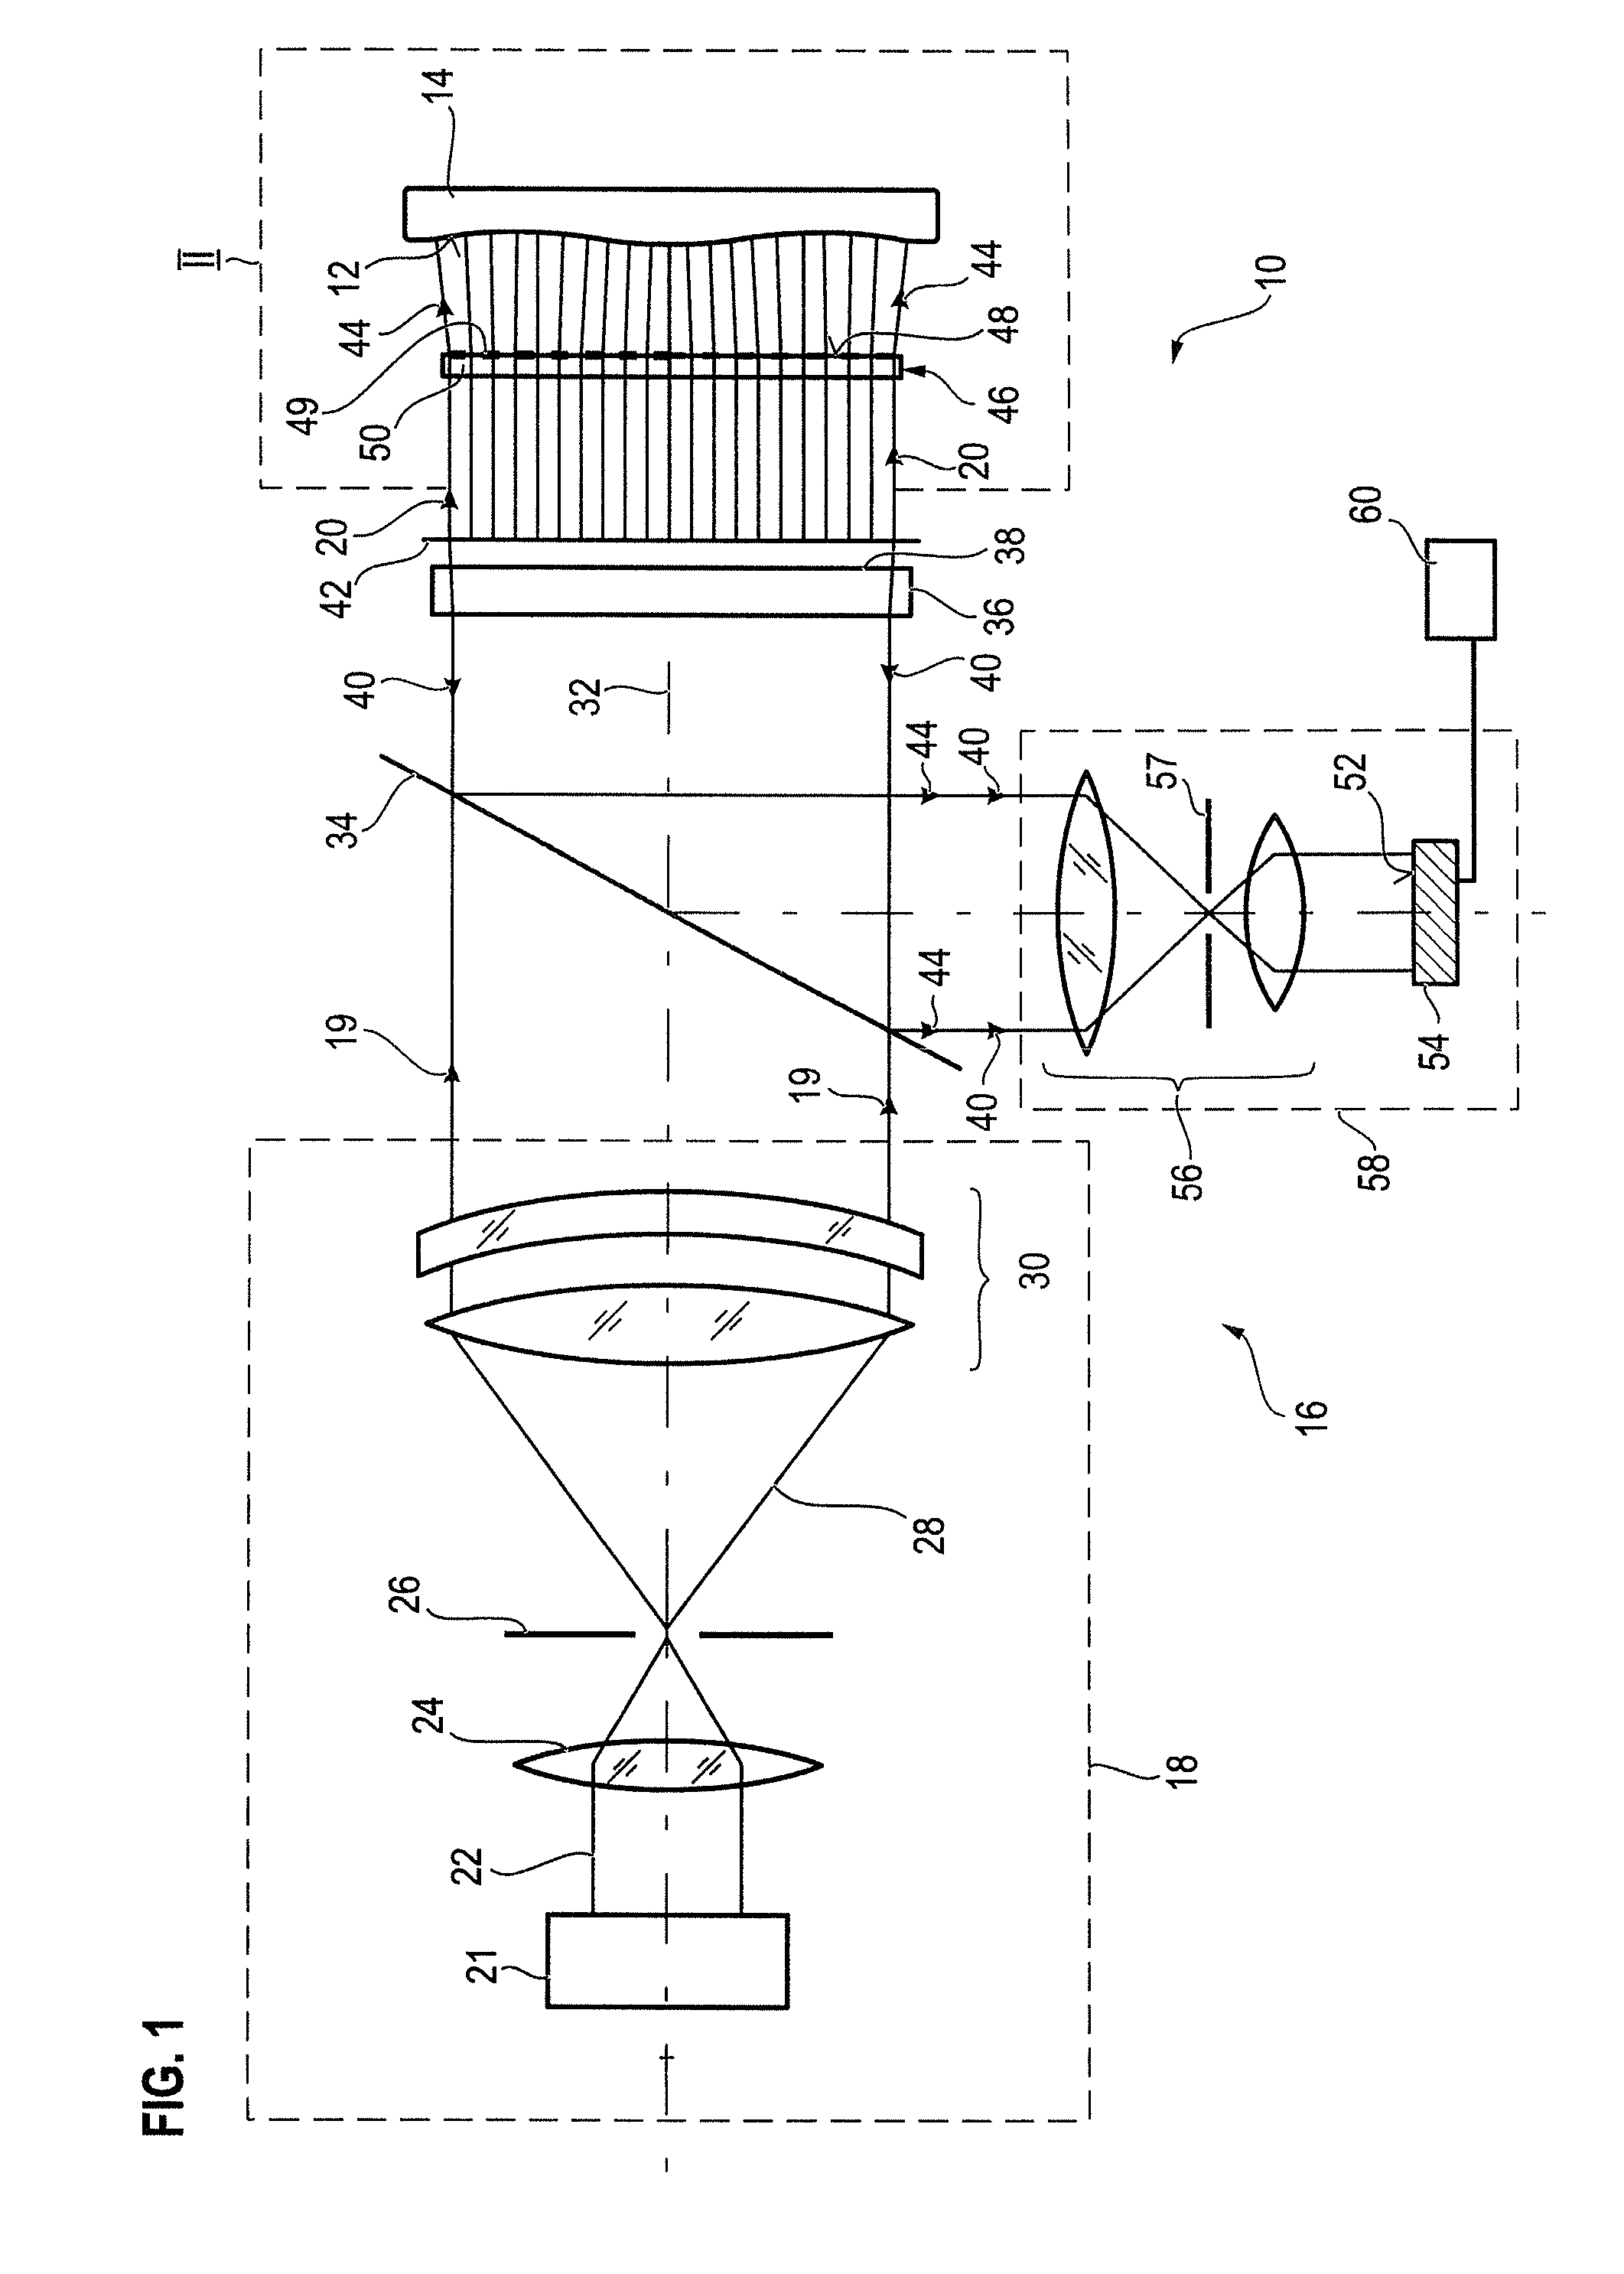 Optical element and method of calibrating a measuring apparatus comprising a wave shaping structure